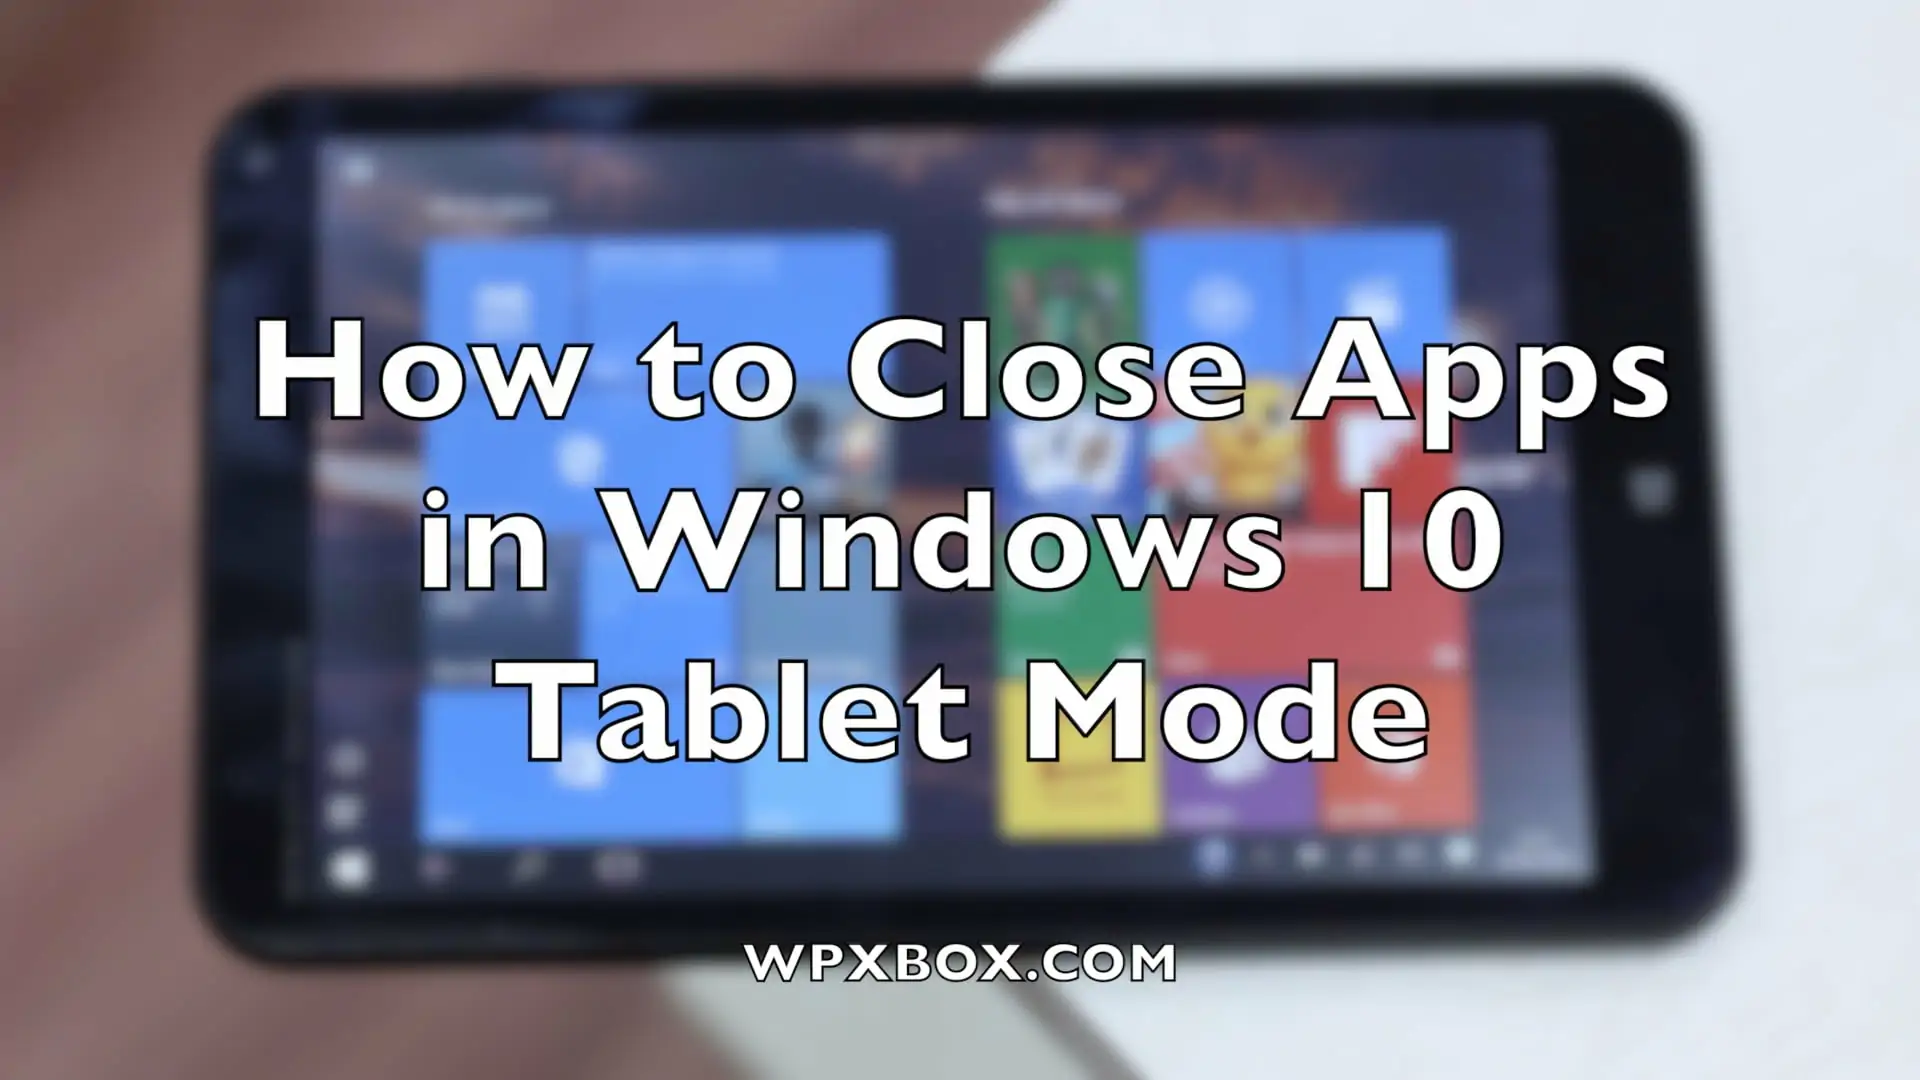 How to Close Apps in Windows 10 Tablet Mode